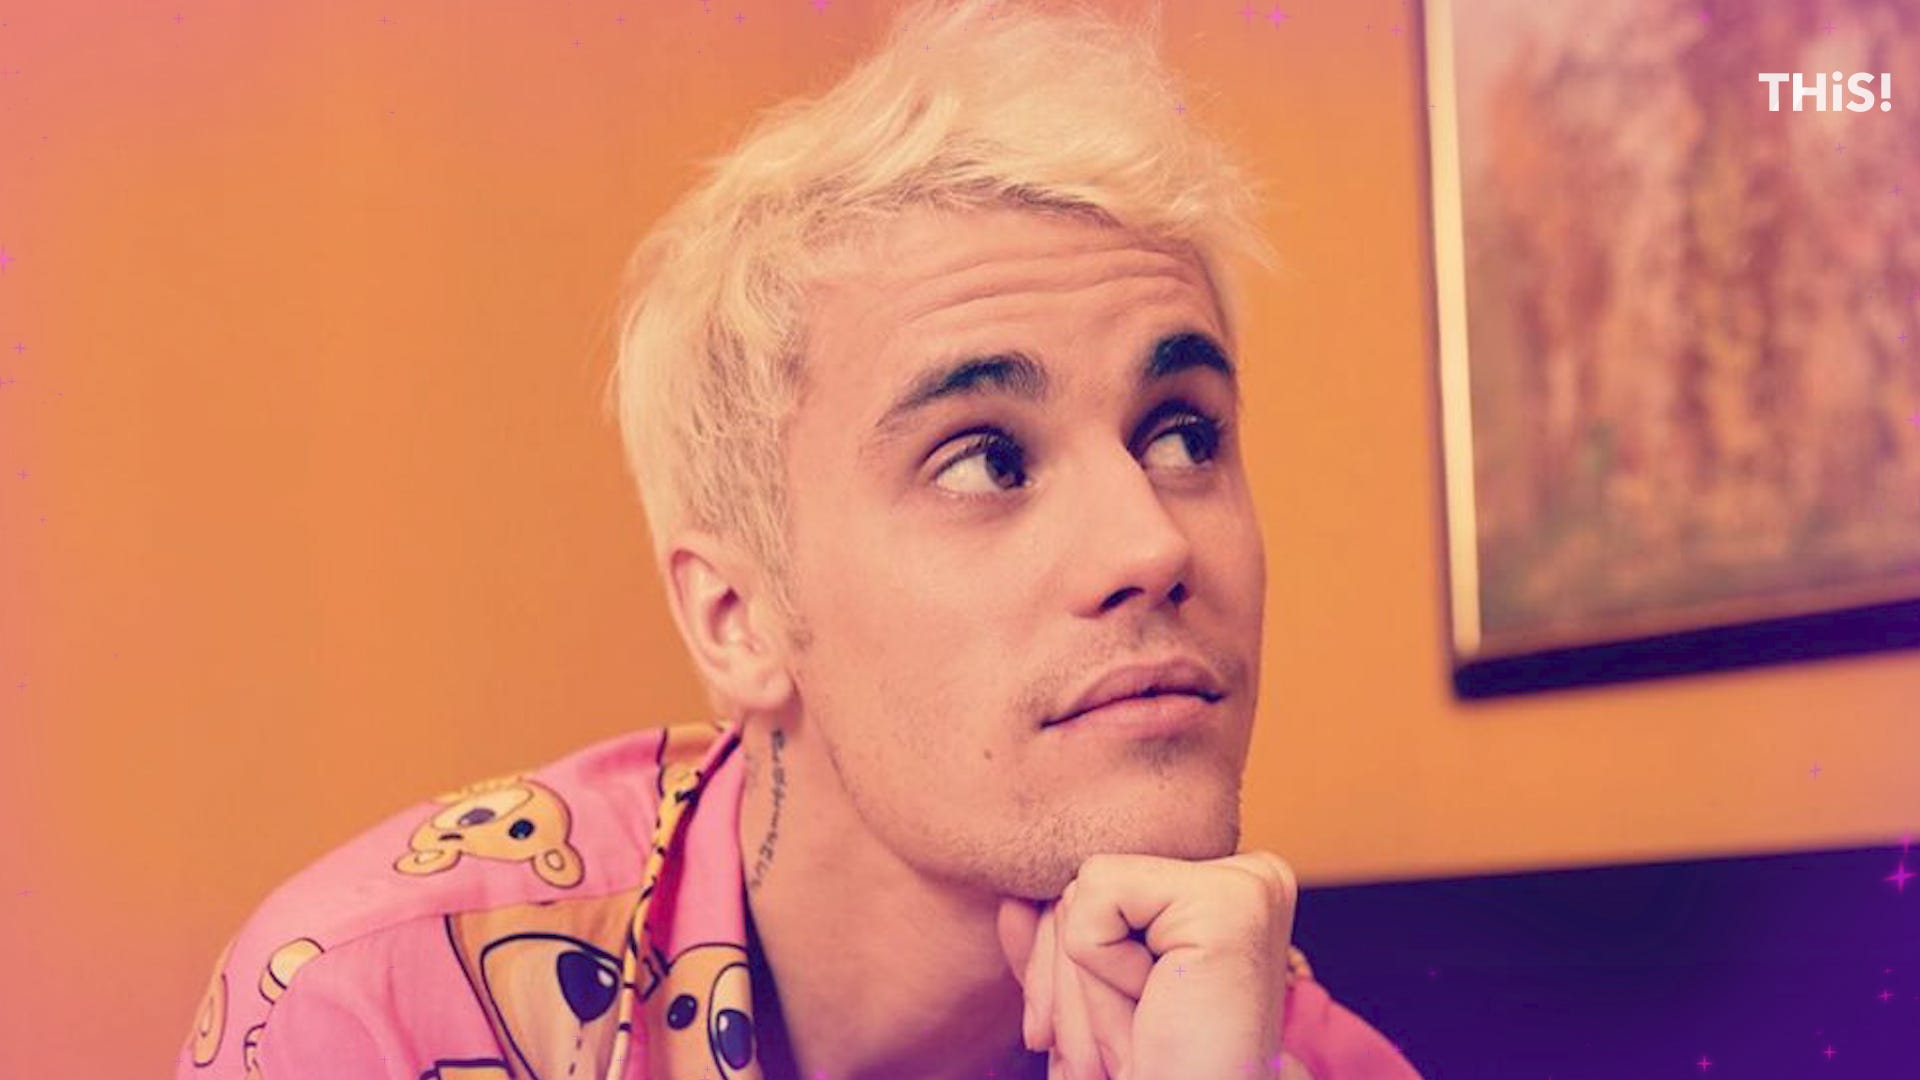 Justin Bieber to drop new album on February 14 - The Week